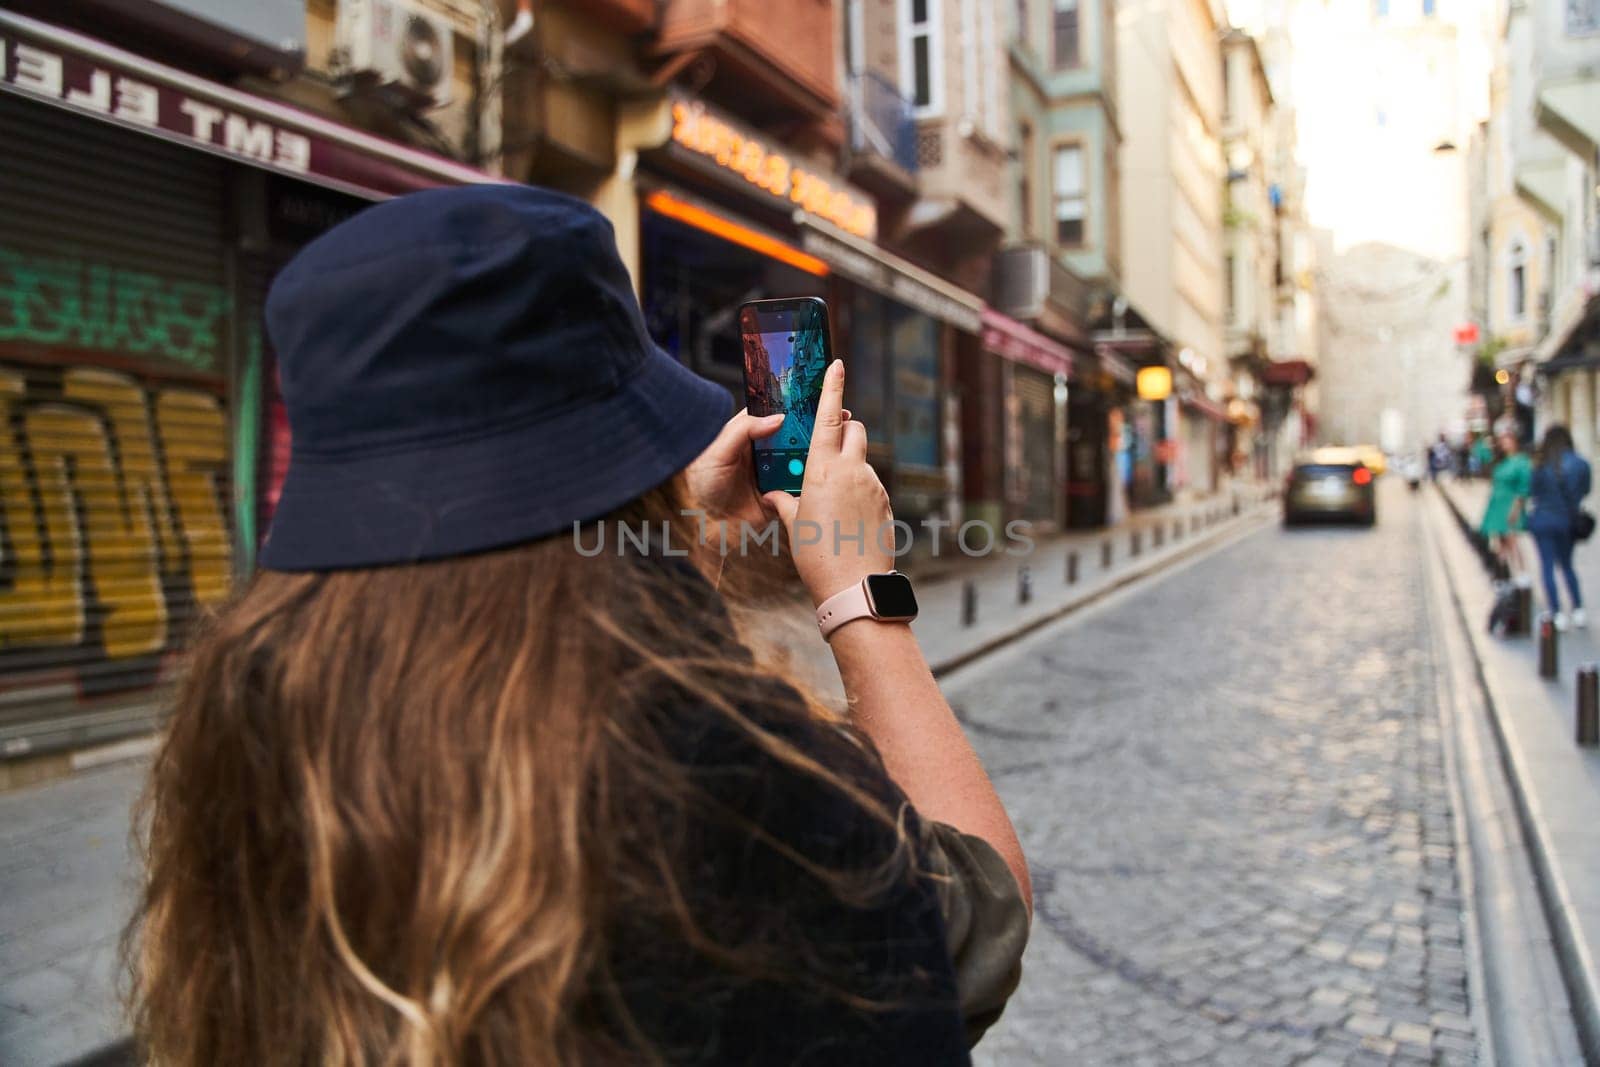 ISTANBUL, TURKEY - 08.05.2021: Young woman photographs the sights of Istanbul on her phone. High quality photo